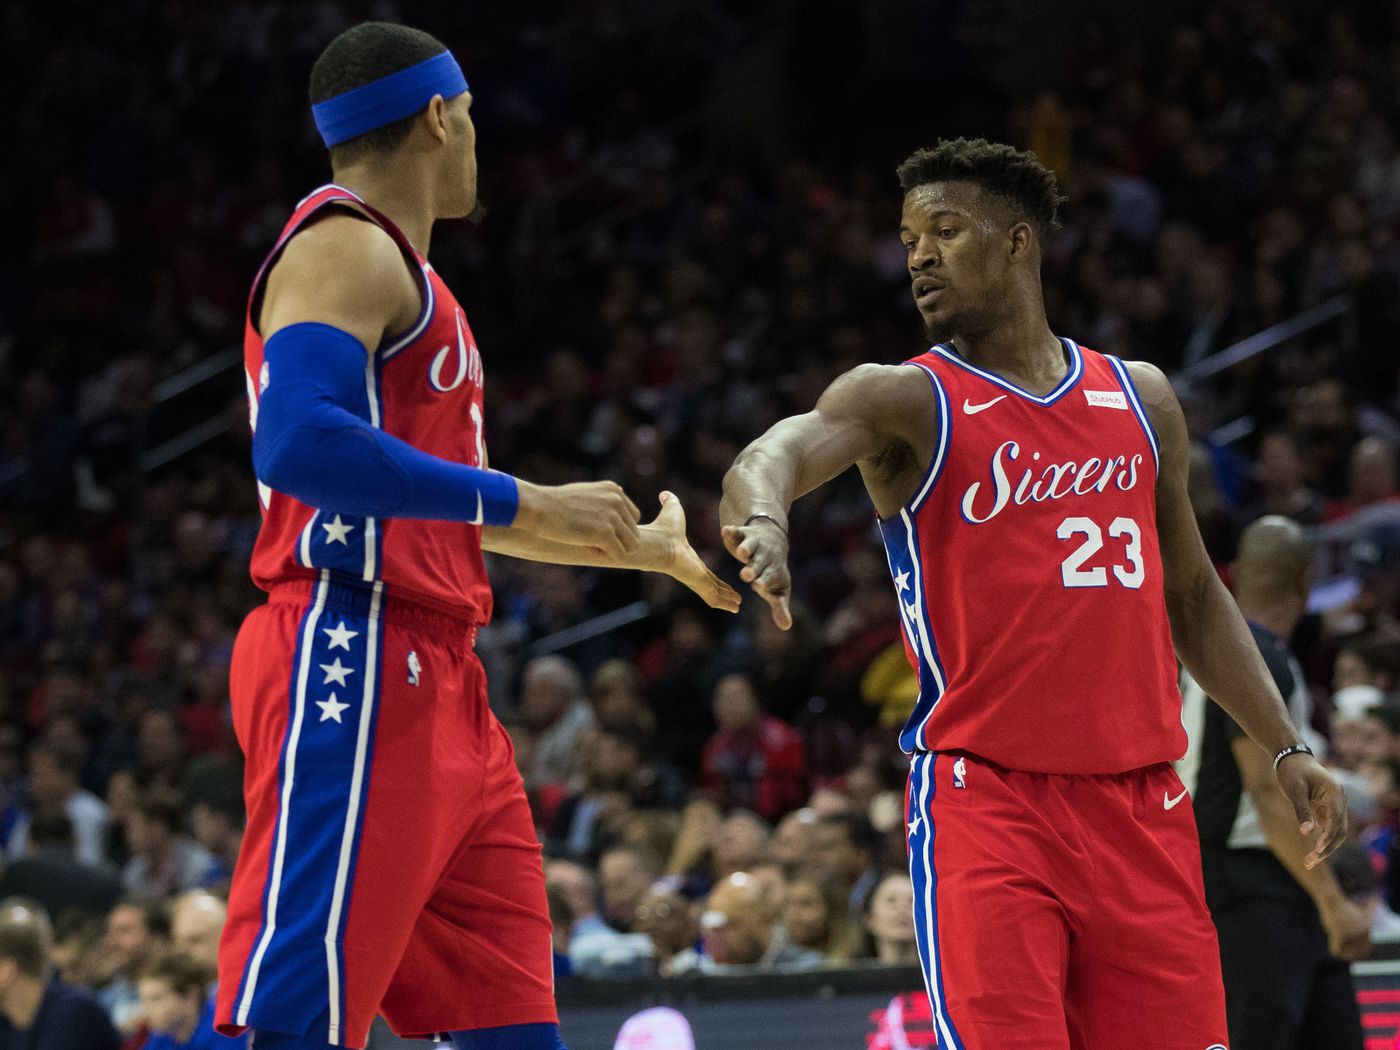 Sixers Free Agency Primer: An in-depth look at salary cap implications,  potential targets, and more - Liberty Ballers